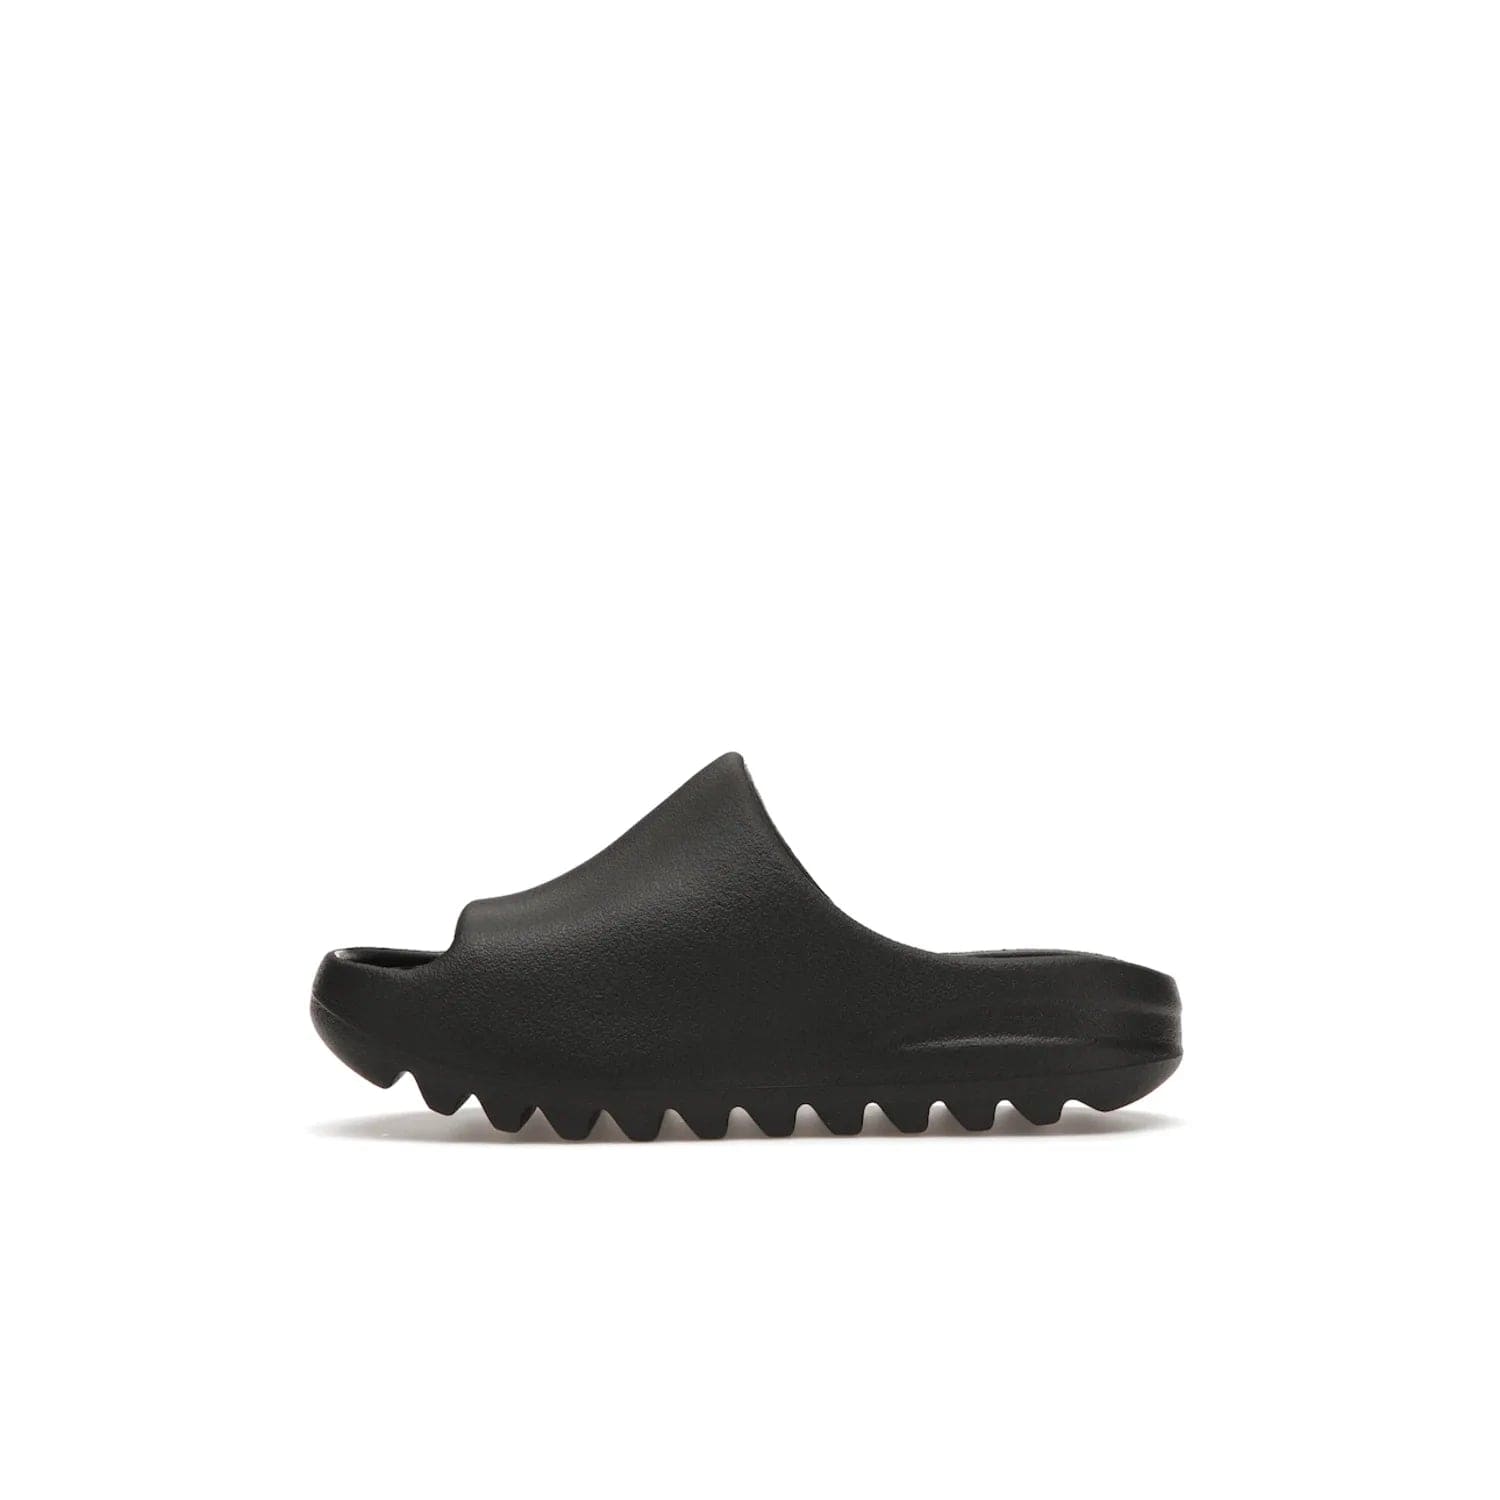 adidas Yeezy Slide Onyx (Kids) - Image 19 - Only at www.BallersClubKickz.com - adidas Yeezy Slide Onyx (Kids): Comfortable foam construction with textured surface and iconic three-stripe logo. Breathable, open-toe design and deep grooves for traction. Released in March 2021 at $50.